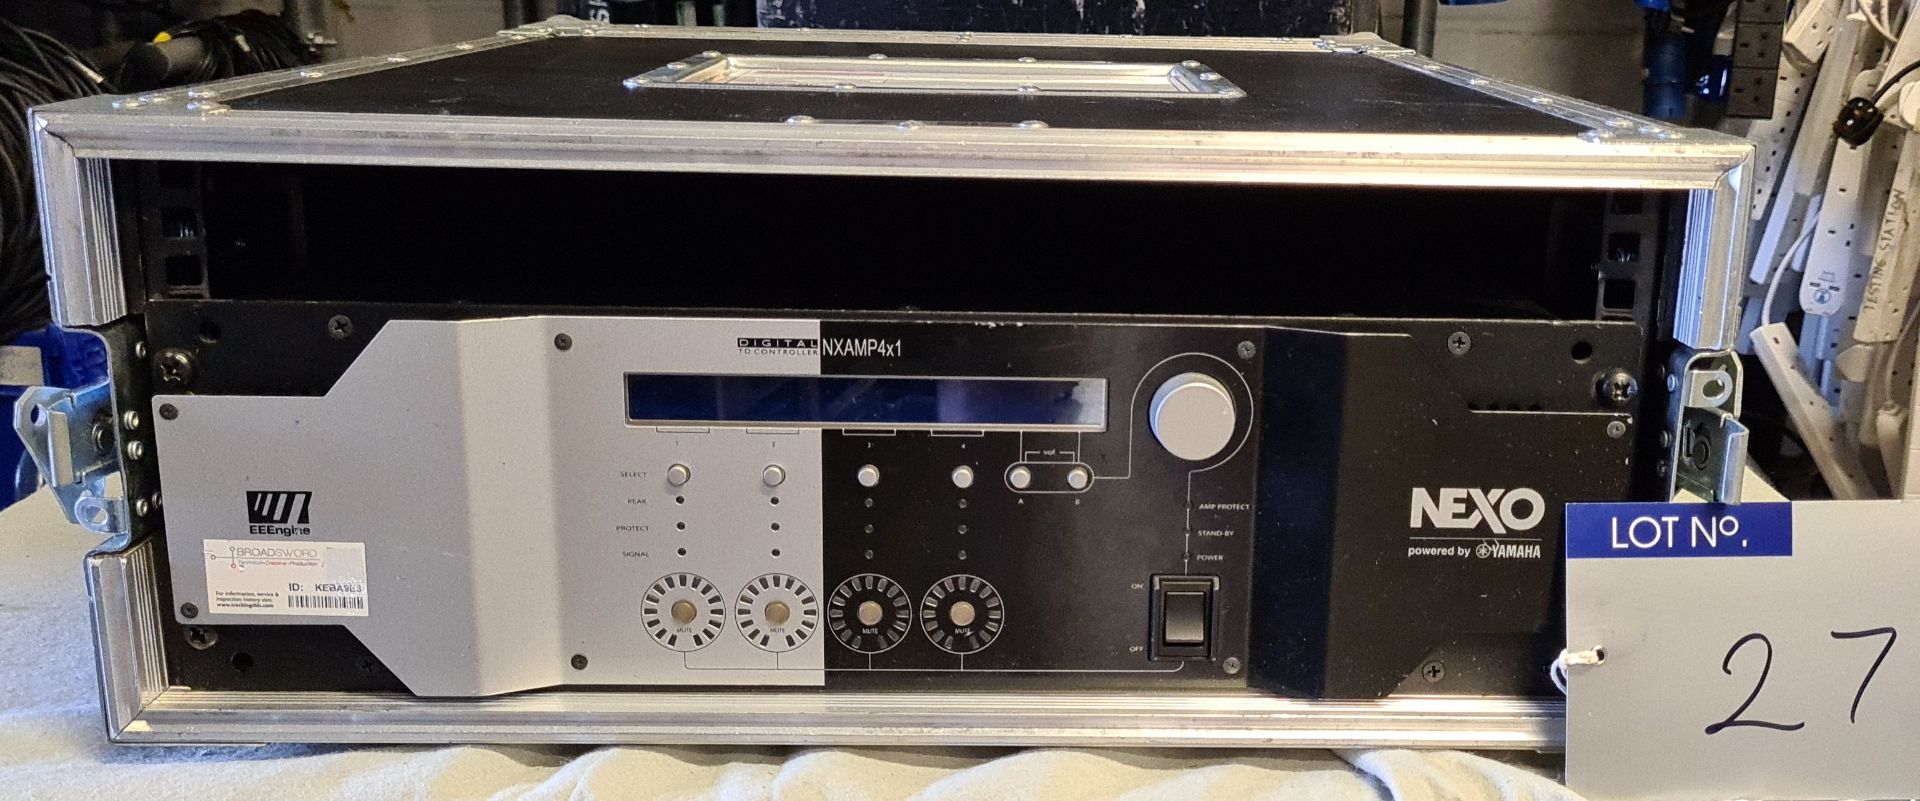 A Nexo NXAMP 4x1 Digital Power Amplifier with flight case (fully tested and working).